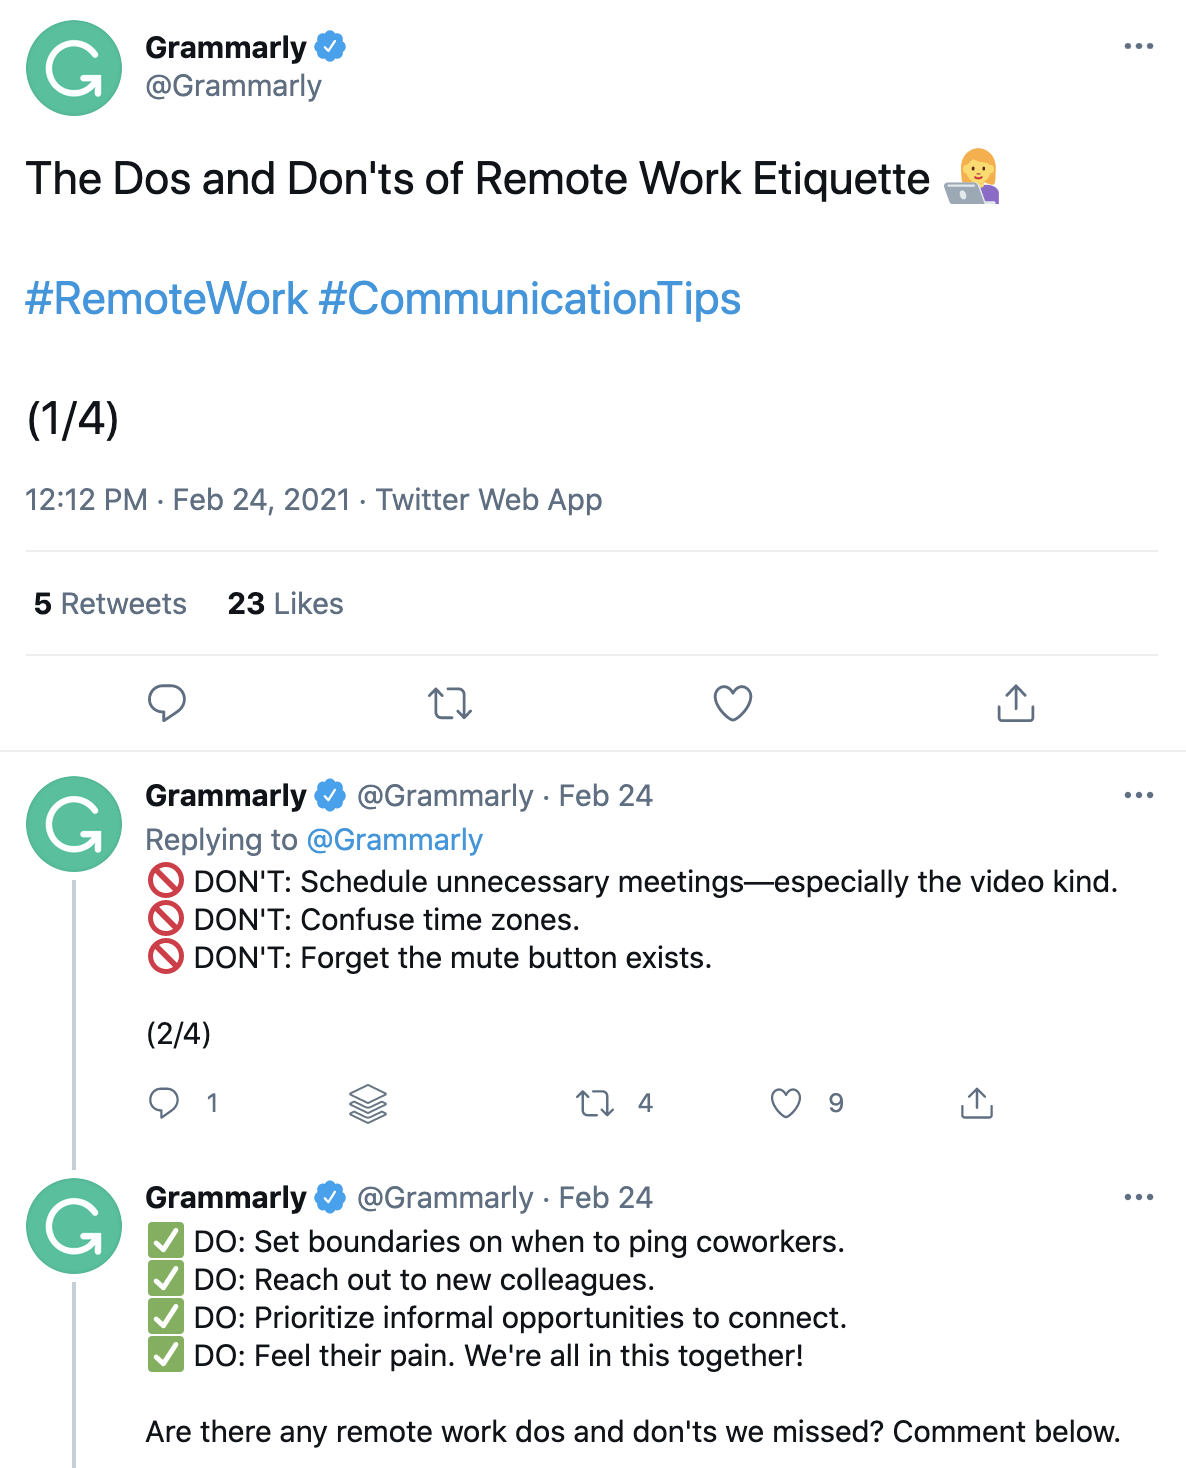 Screenshot of a Twitter thread by Grammarly that is informative and shows empathy.